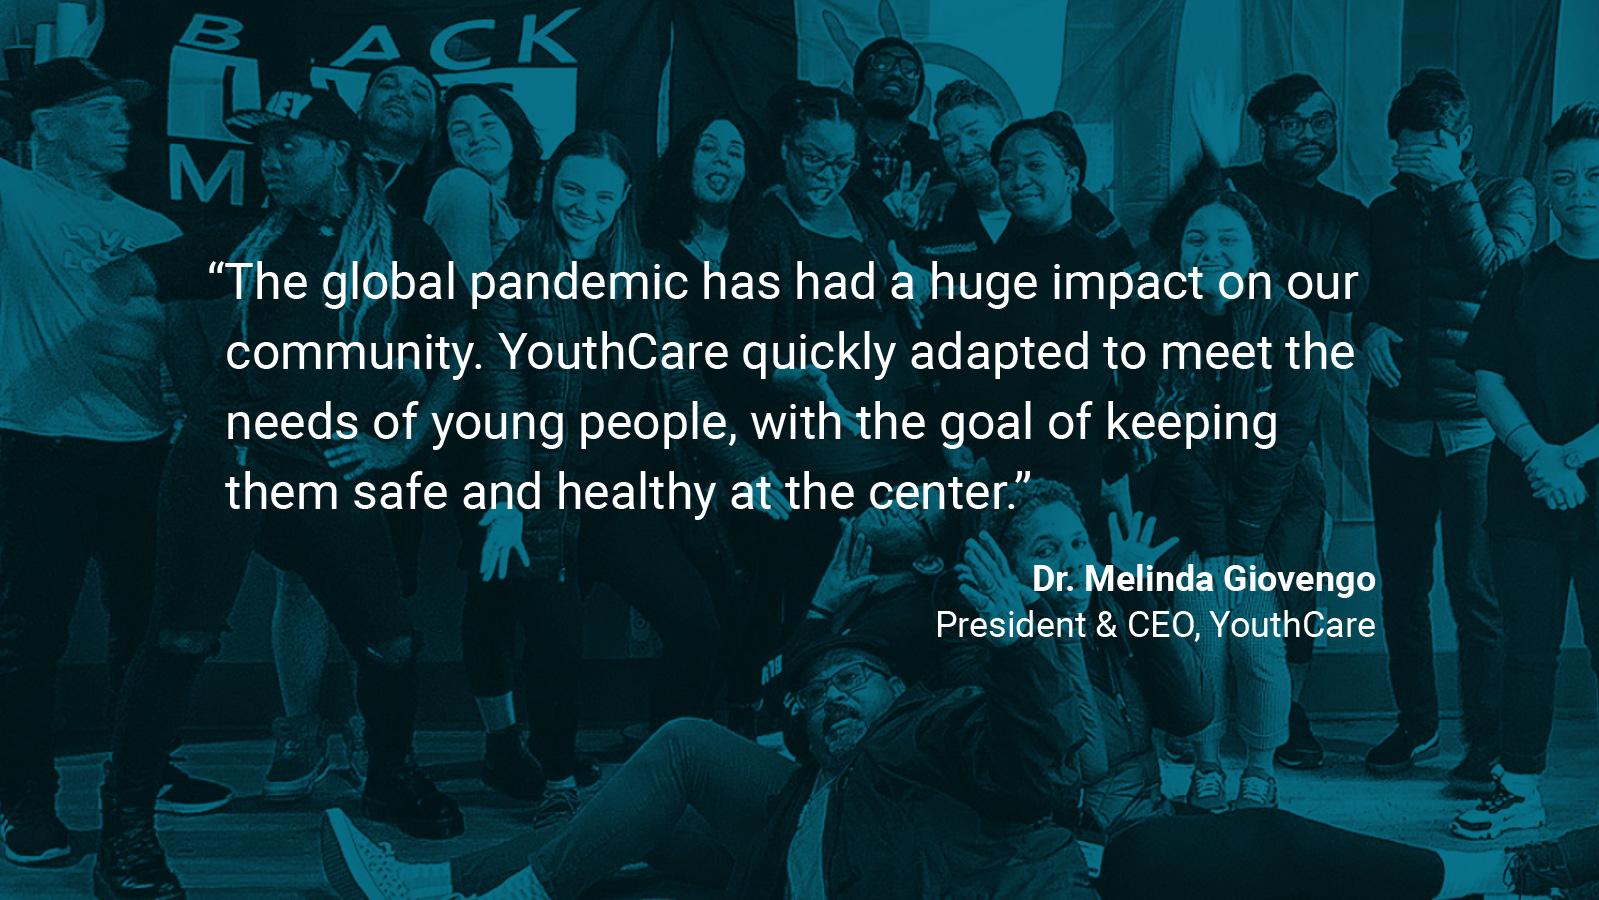 (slide 4 of 4) Quote by: Dr. Melinda Giovengo, President & CEO at YouthCare:  “The global pandemic has had a huge impact on our community. YouthCare quickly adapted to meet the needs of young people, with the goal of keeping them safe and healthy at the center.” . 